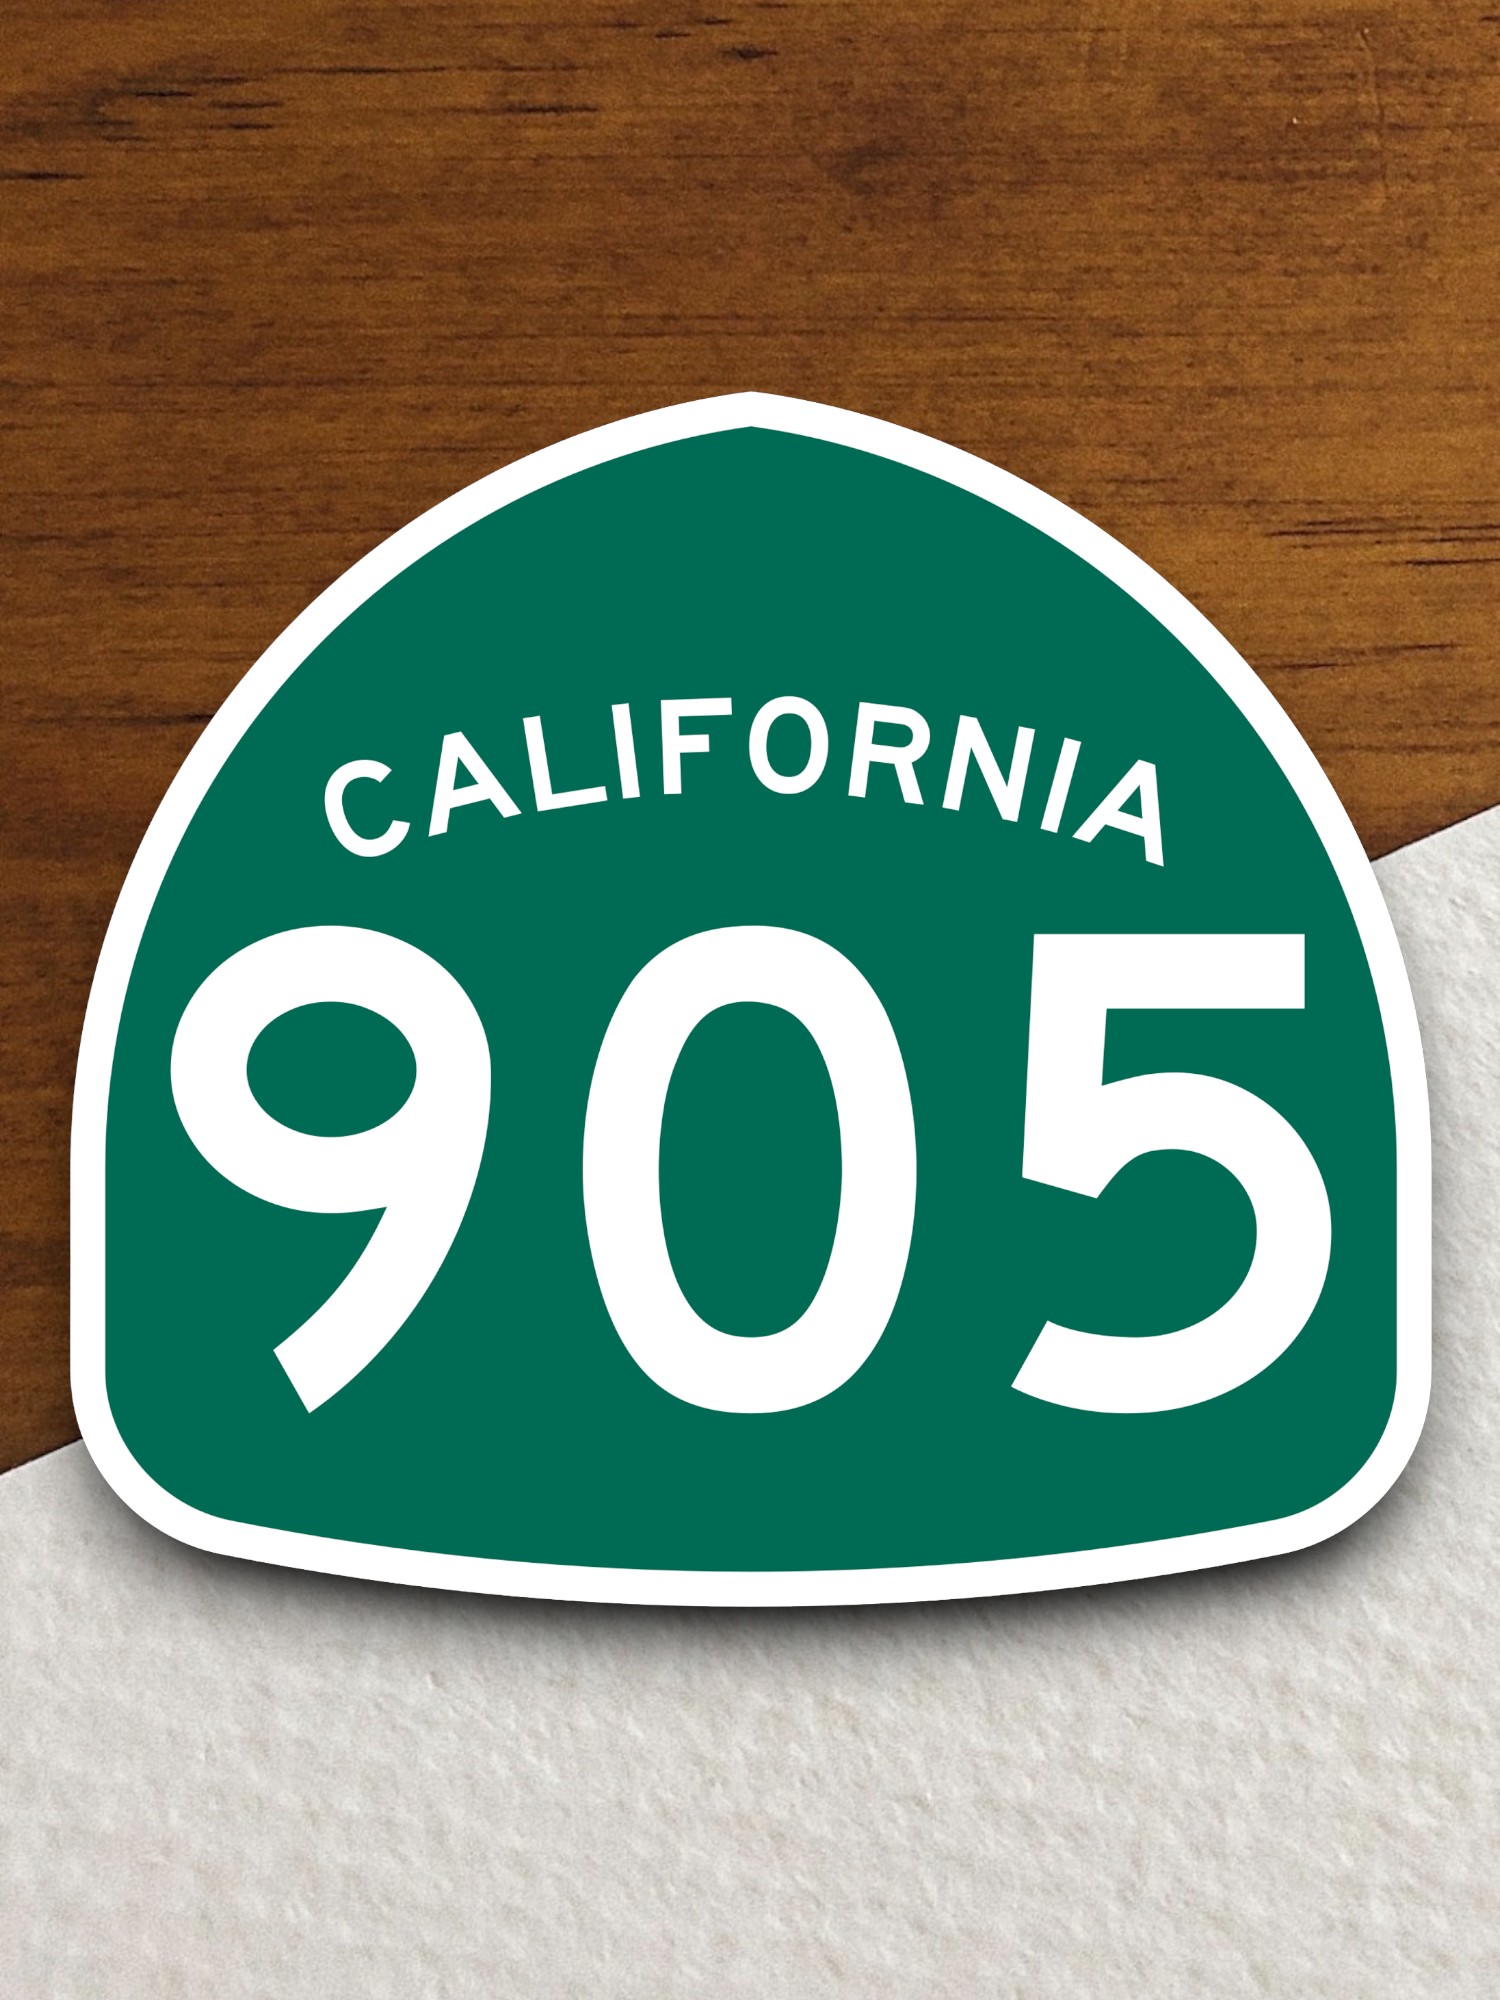 California State Route 905 Road Sign Sticker